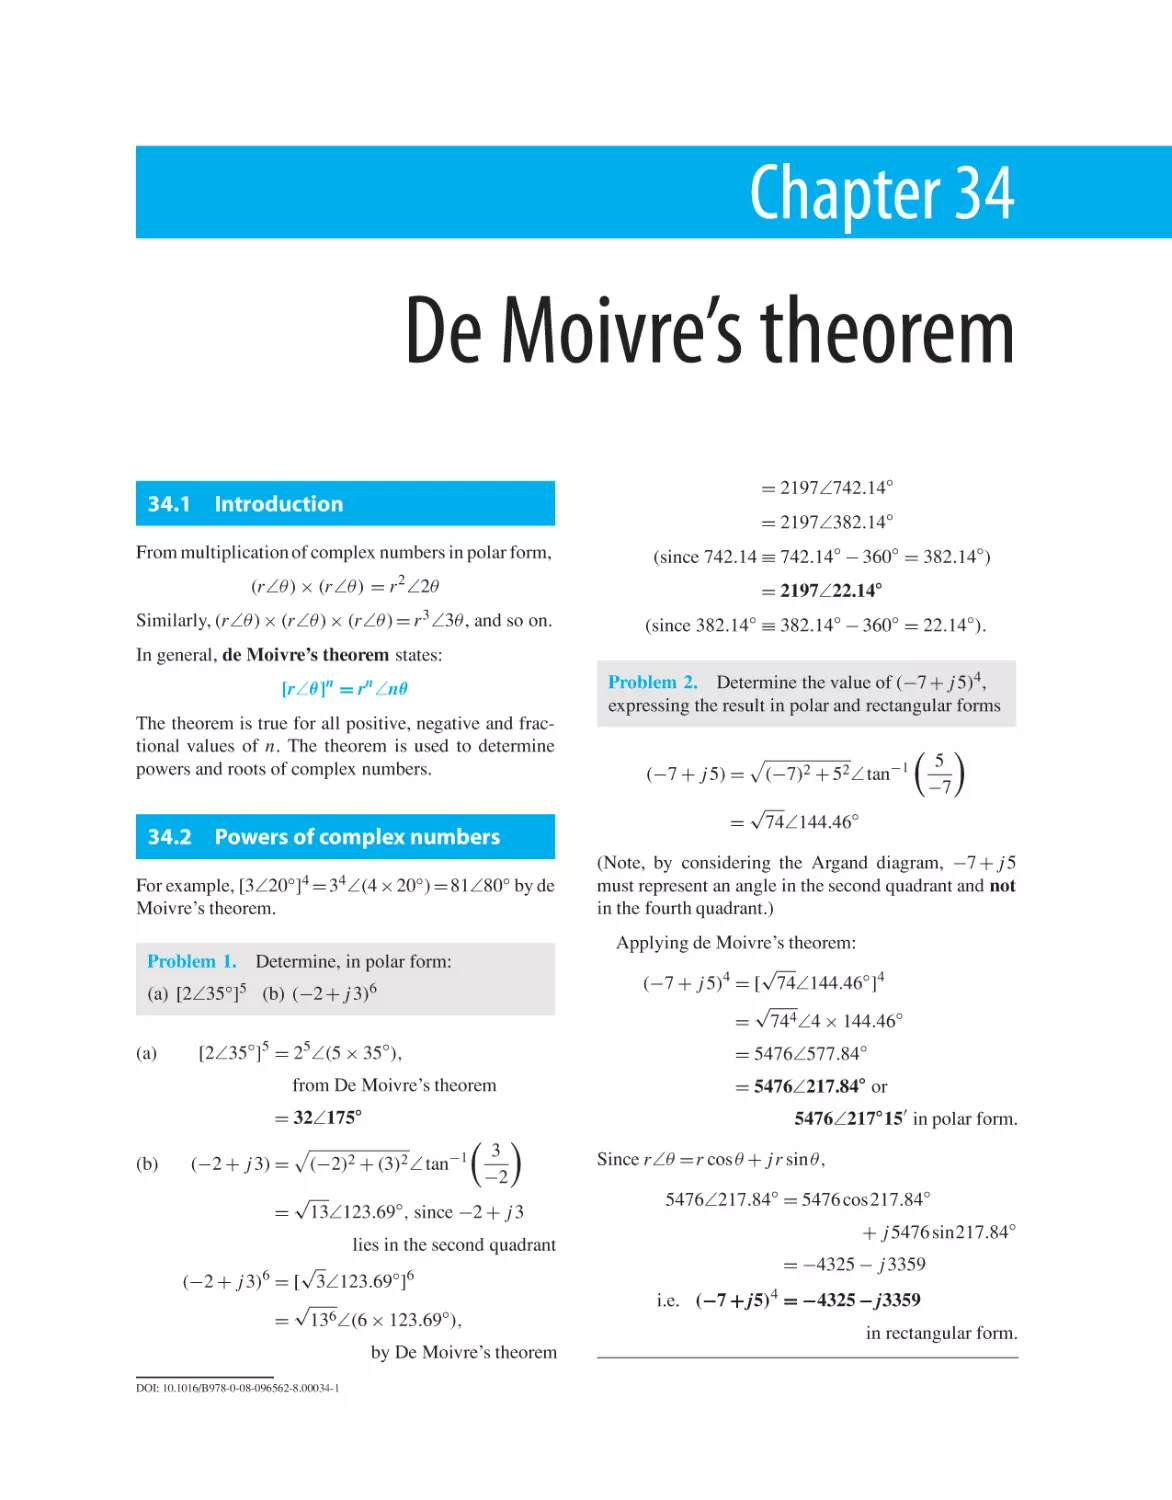 Chapter 34. De Moivre’s theorem
34.1 Introduction
34.2 Powers of complex numbers